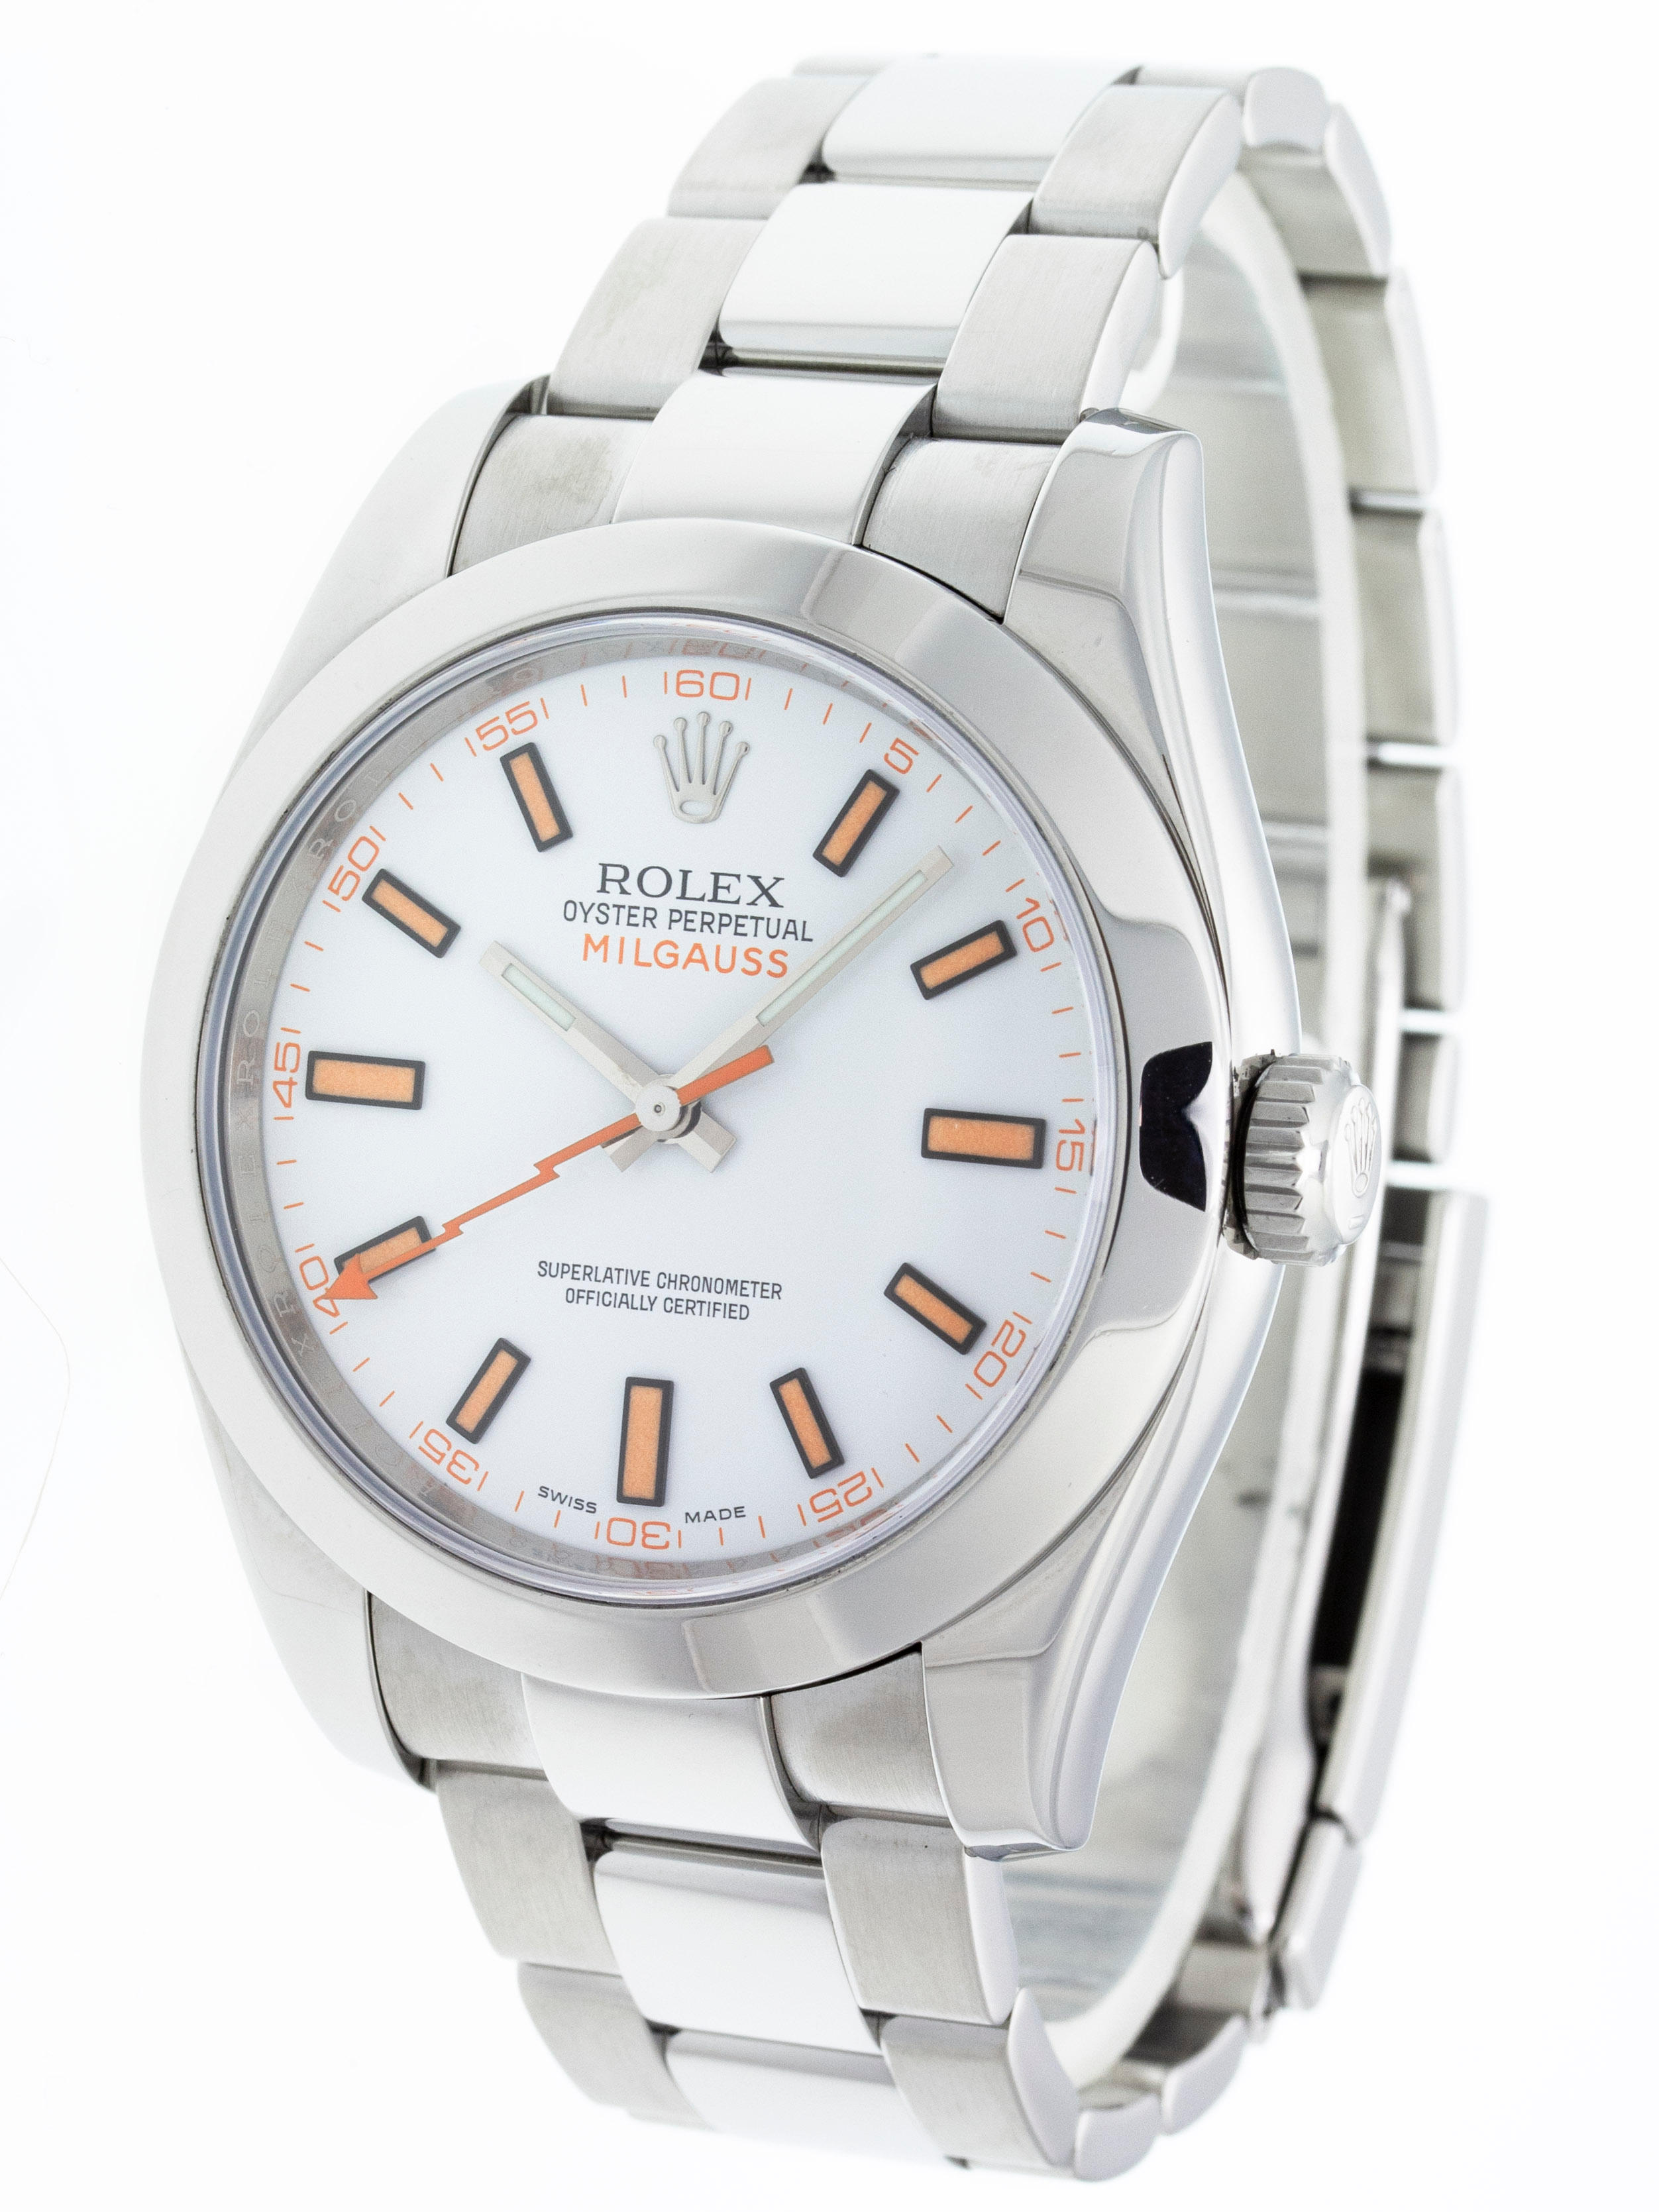 Precision Watches & Jewelry - Official Rolex Jeweler Photo